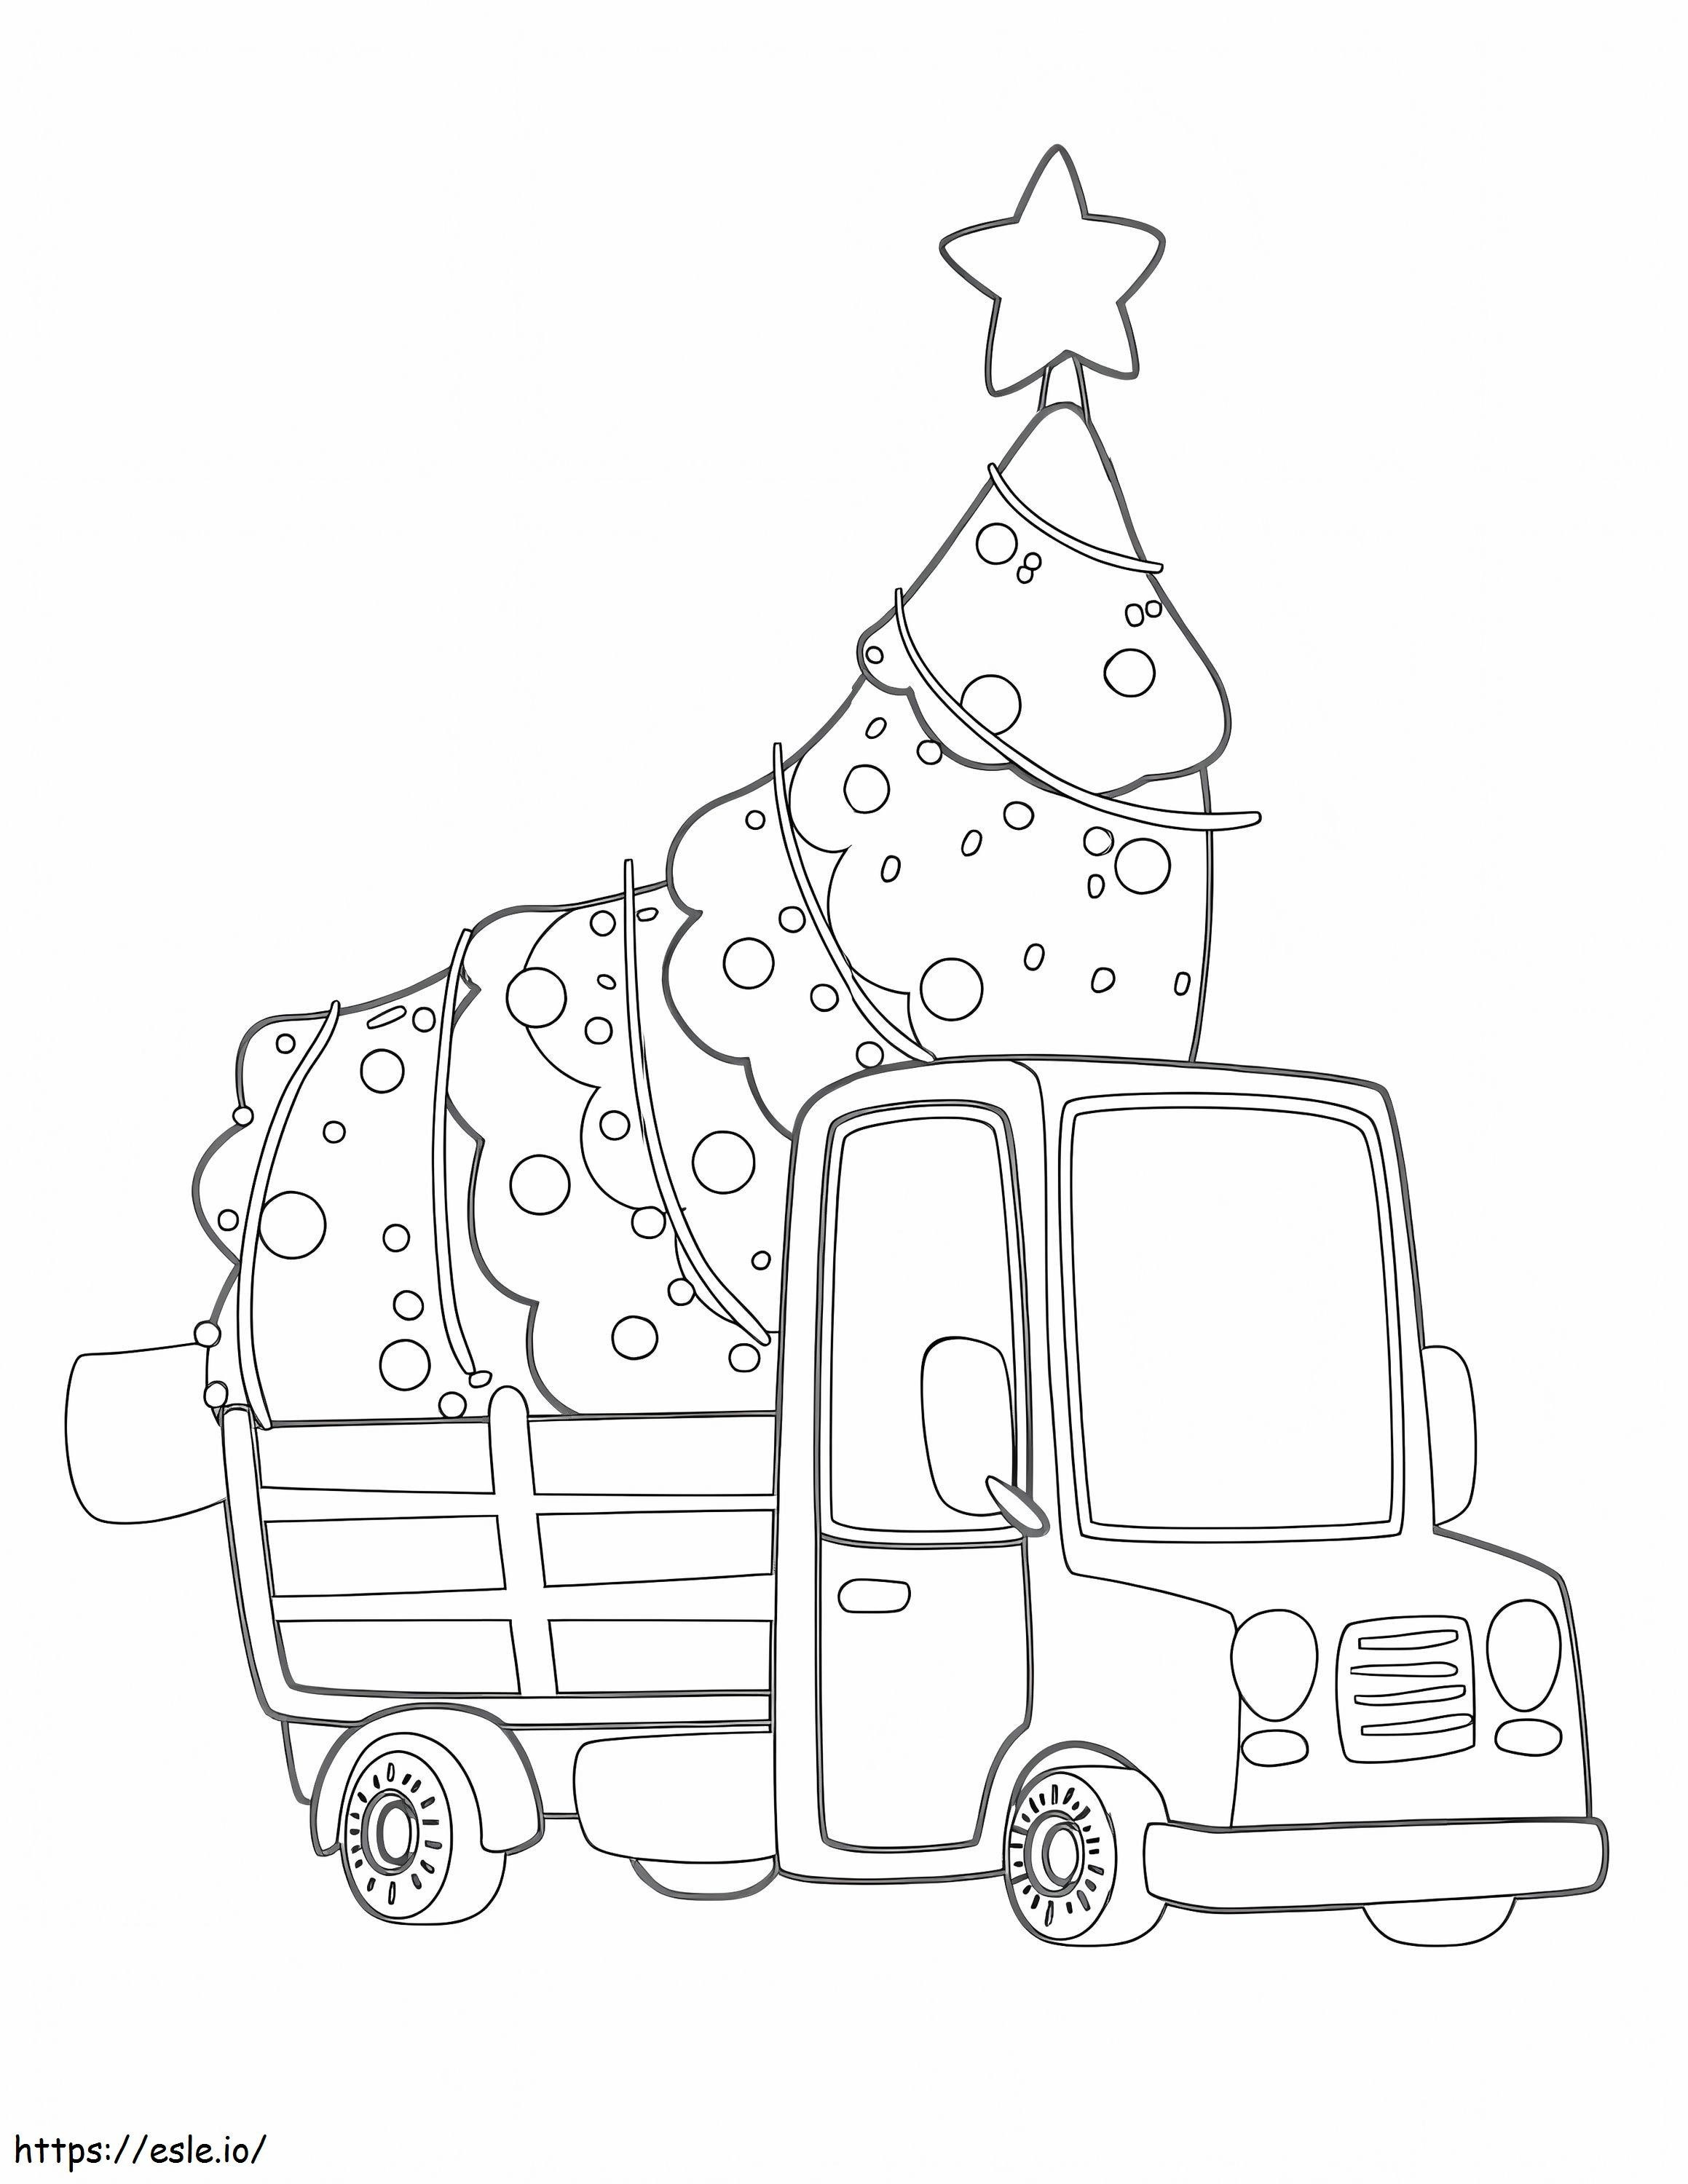 Christmas Tree In The Truck coloring page